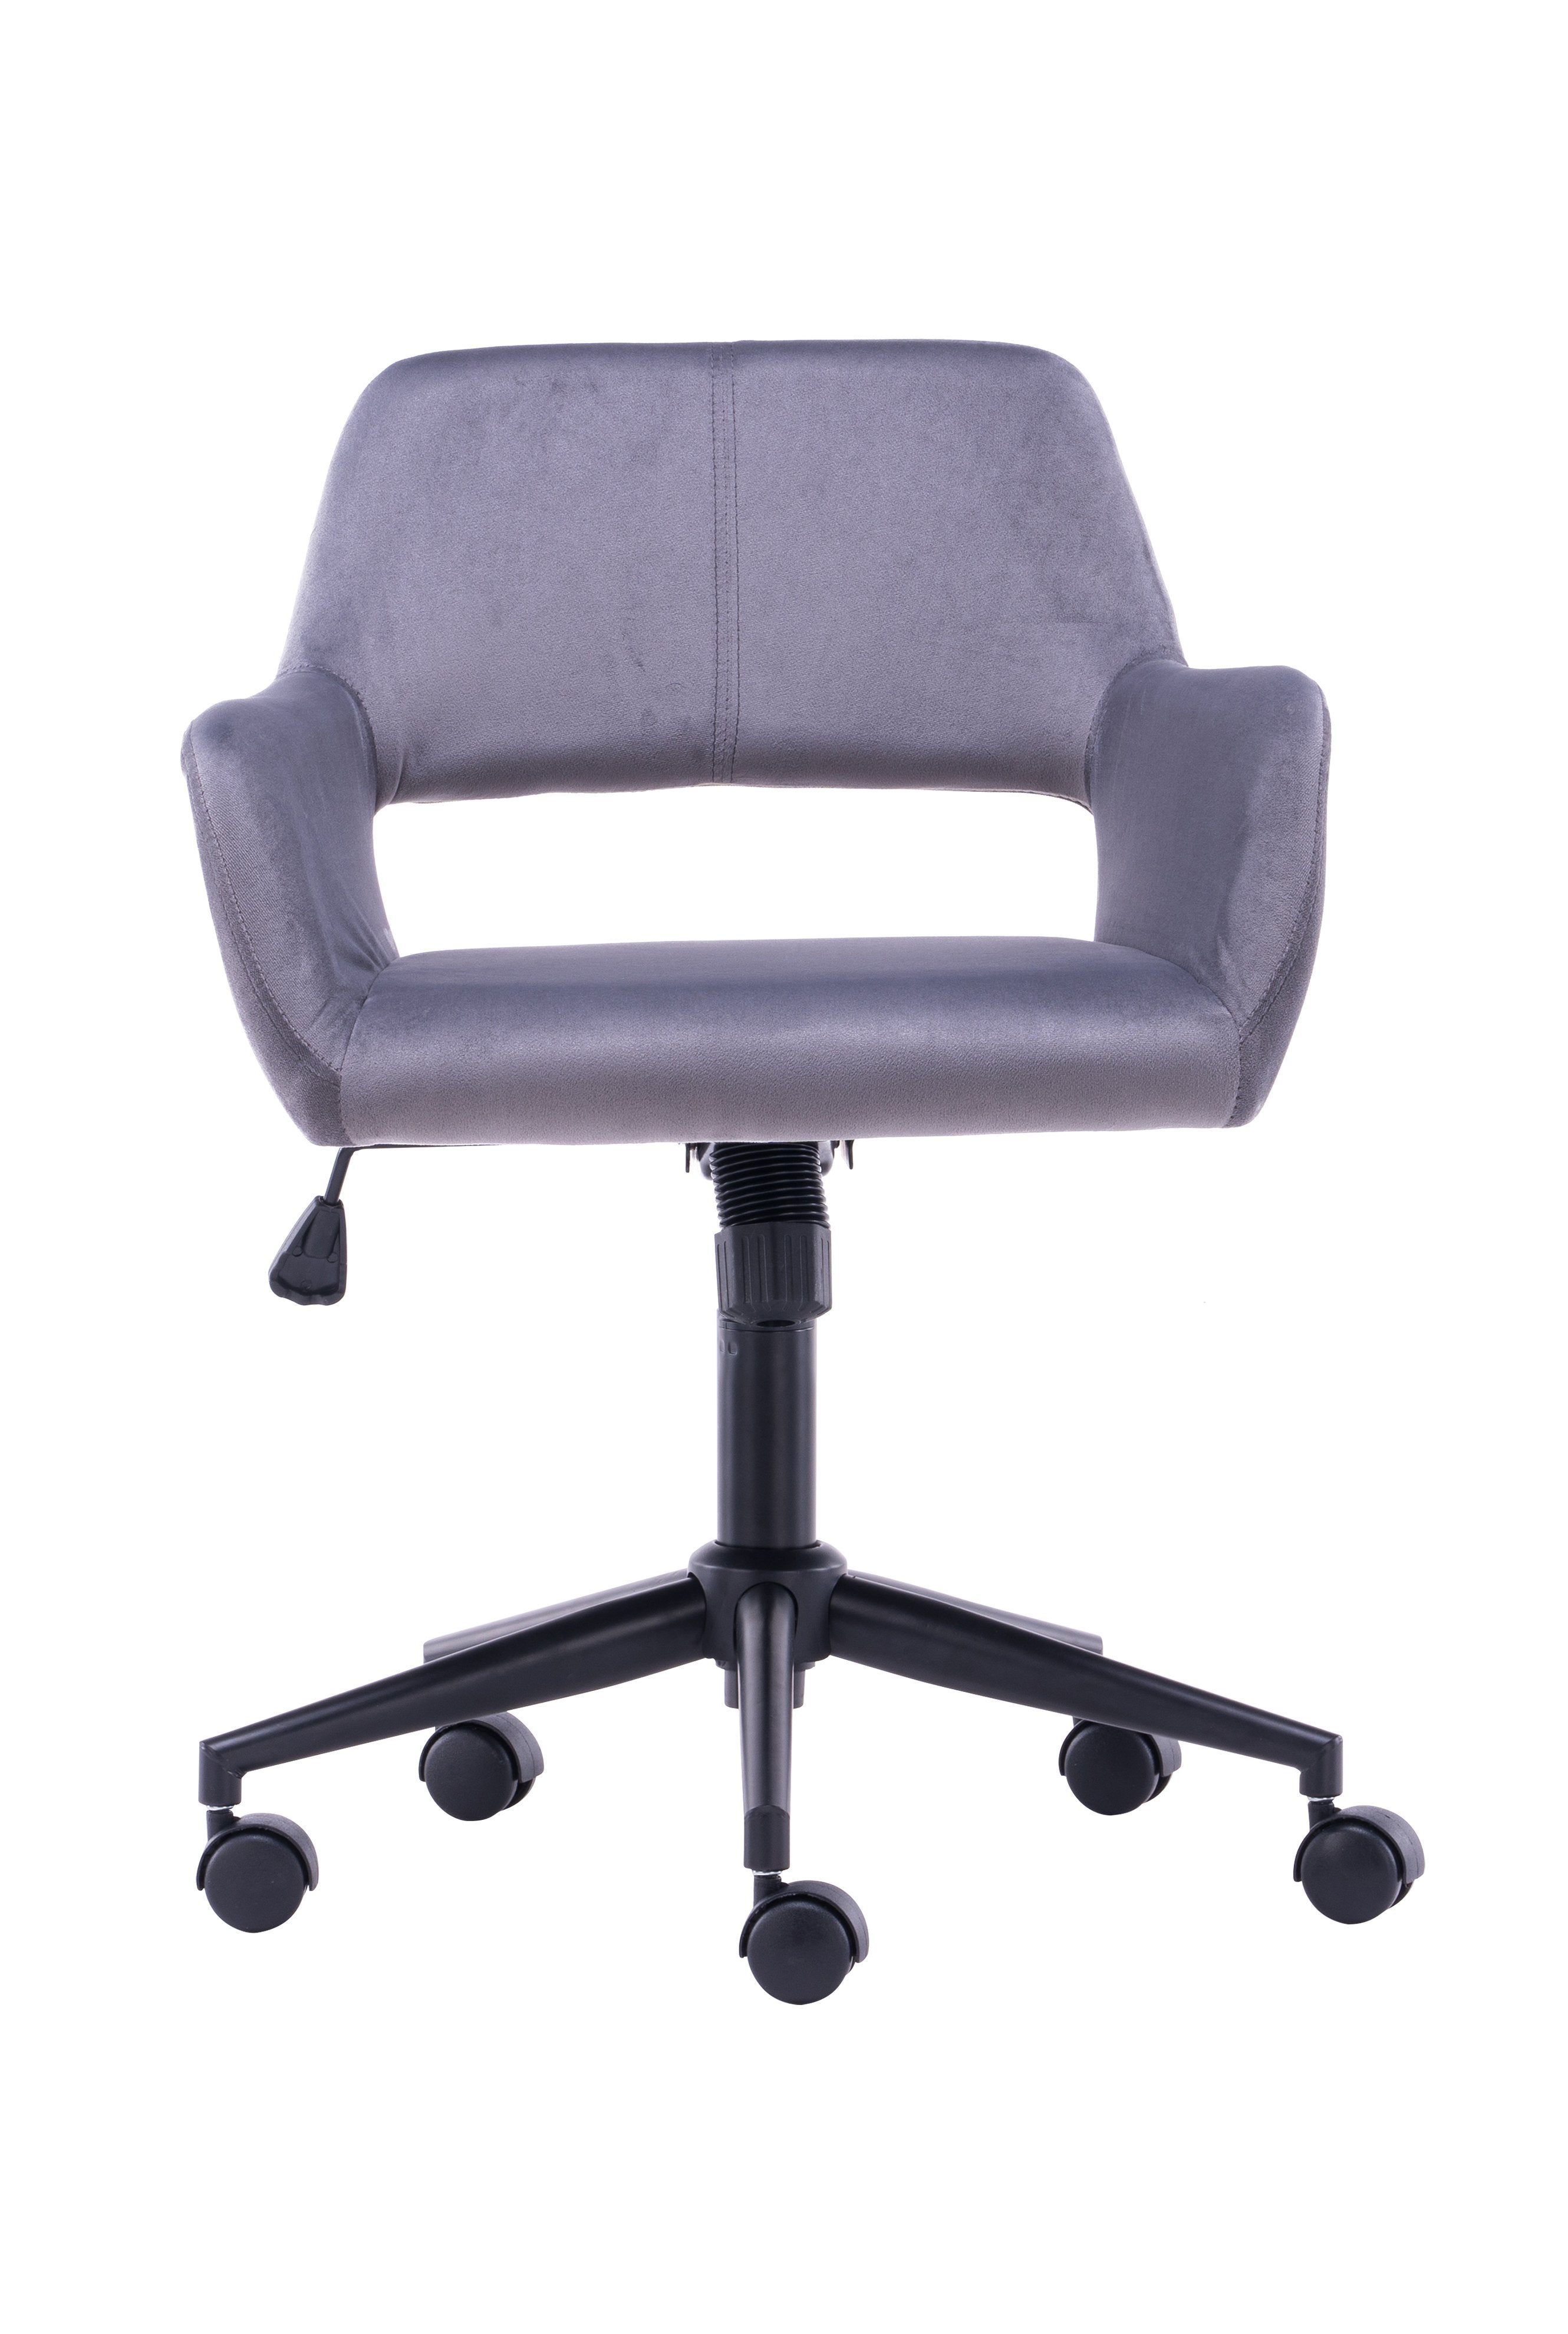 Home Office Chair with Velvet Upholstered, Height-Adjustable with Black finished Steel Base-Boyel Living